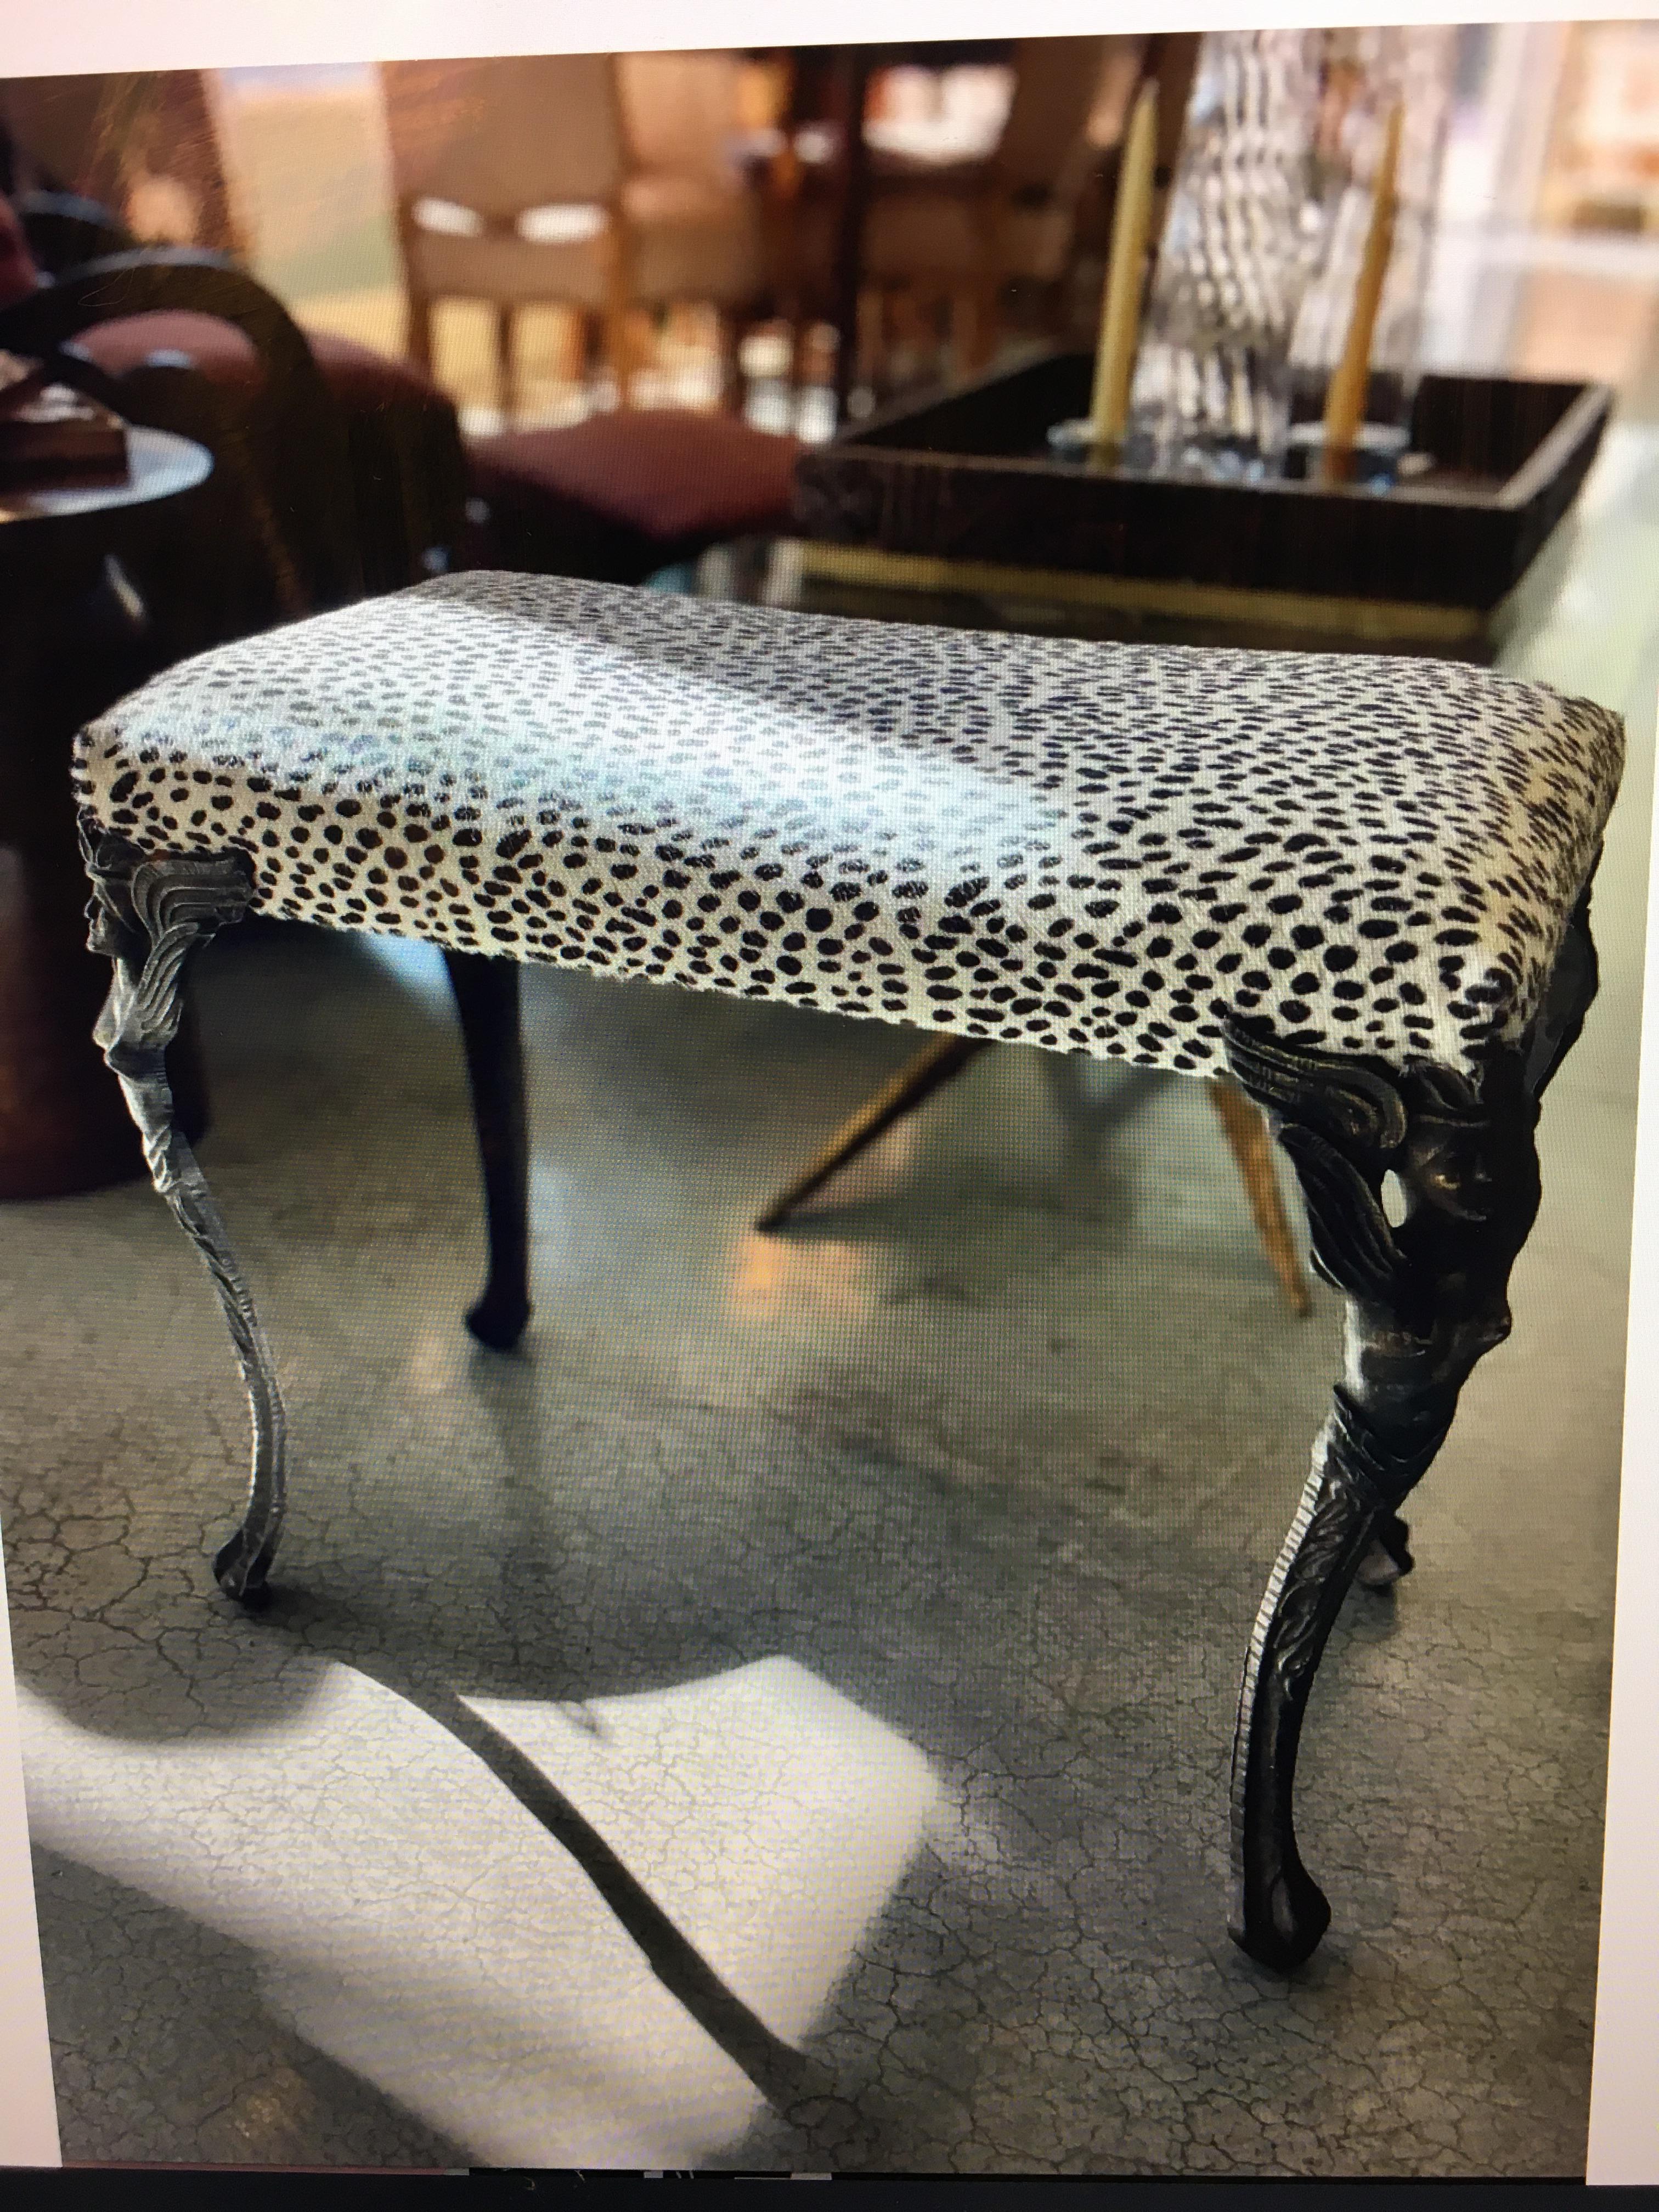 Art Nouveau Cast Iron Vanity Bench W/ Cheetah Printed Hide In Good Condition For Sale In Pasadena, CA